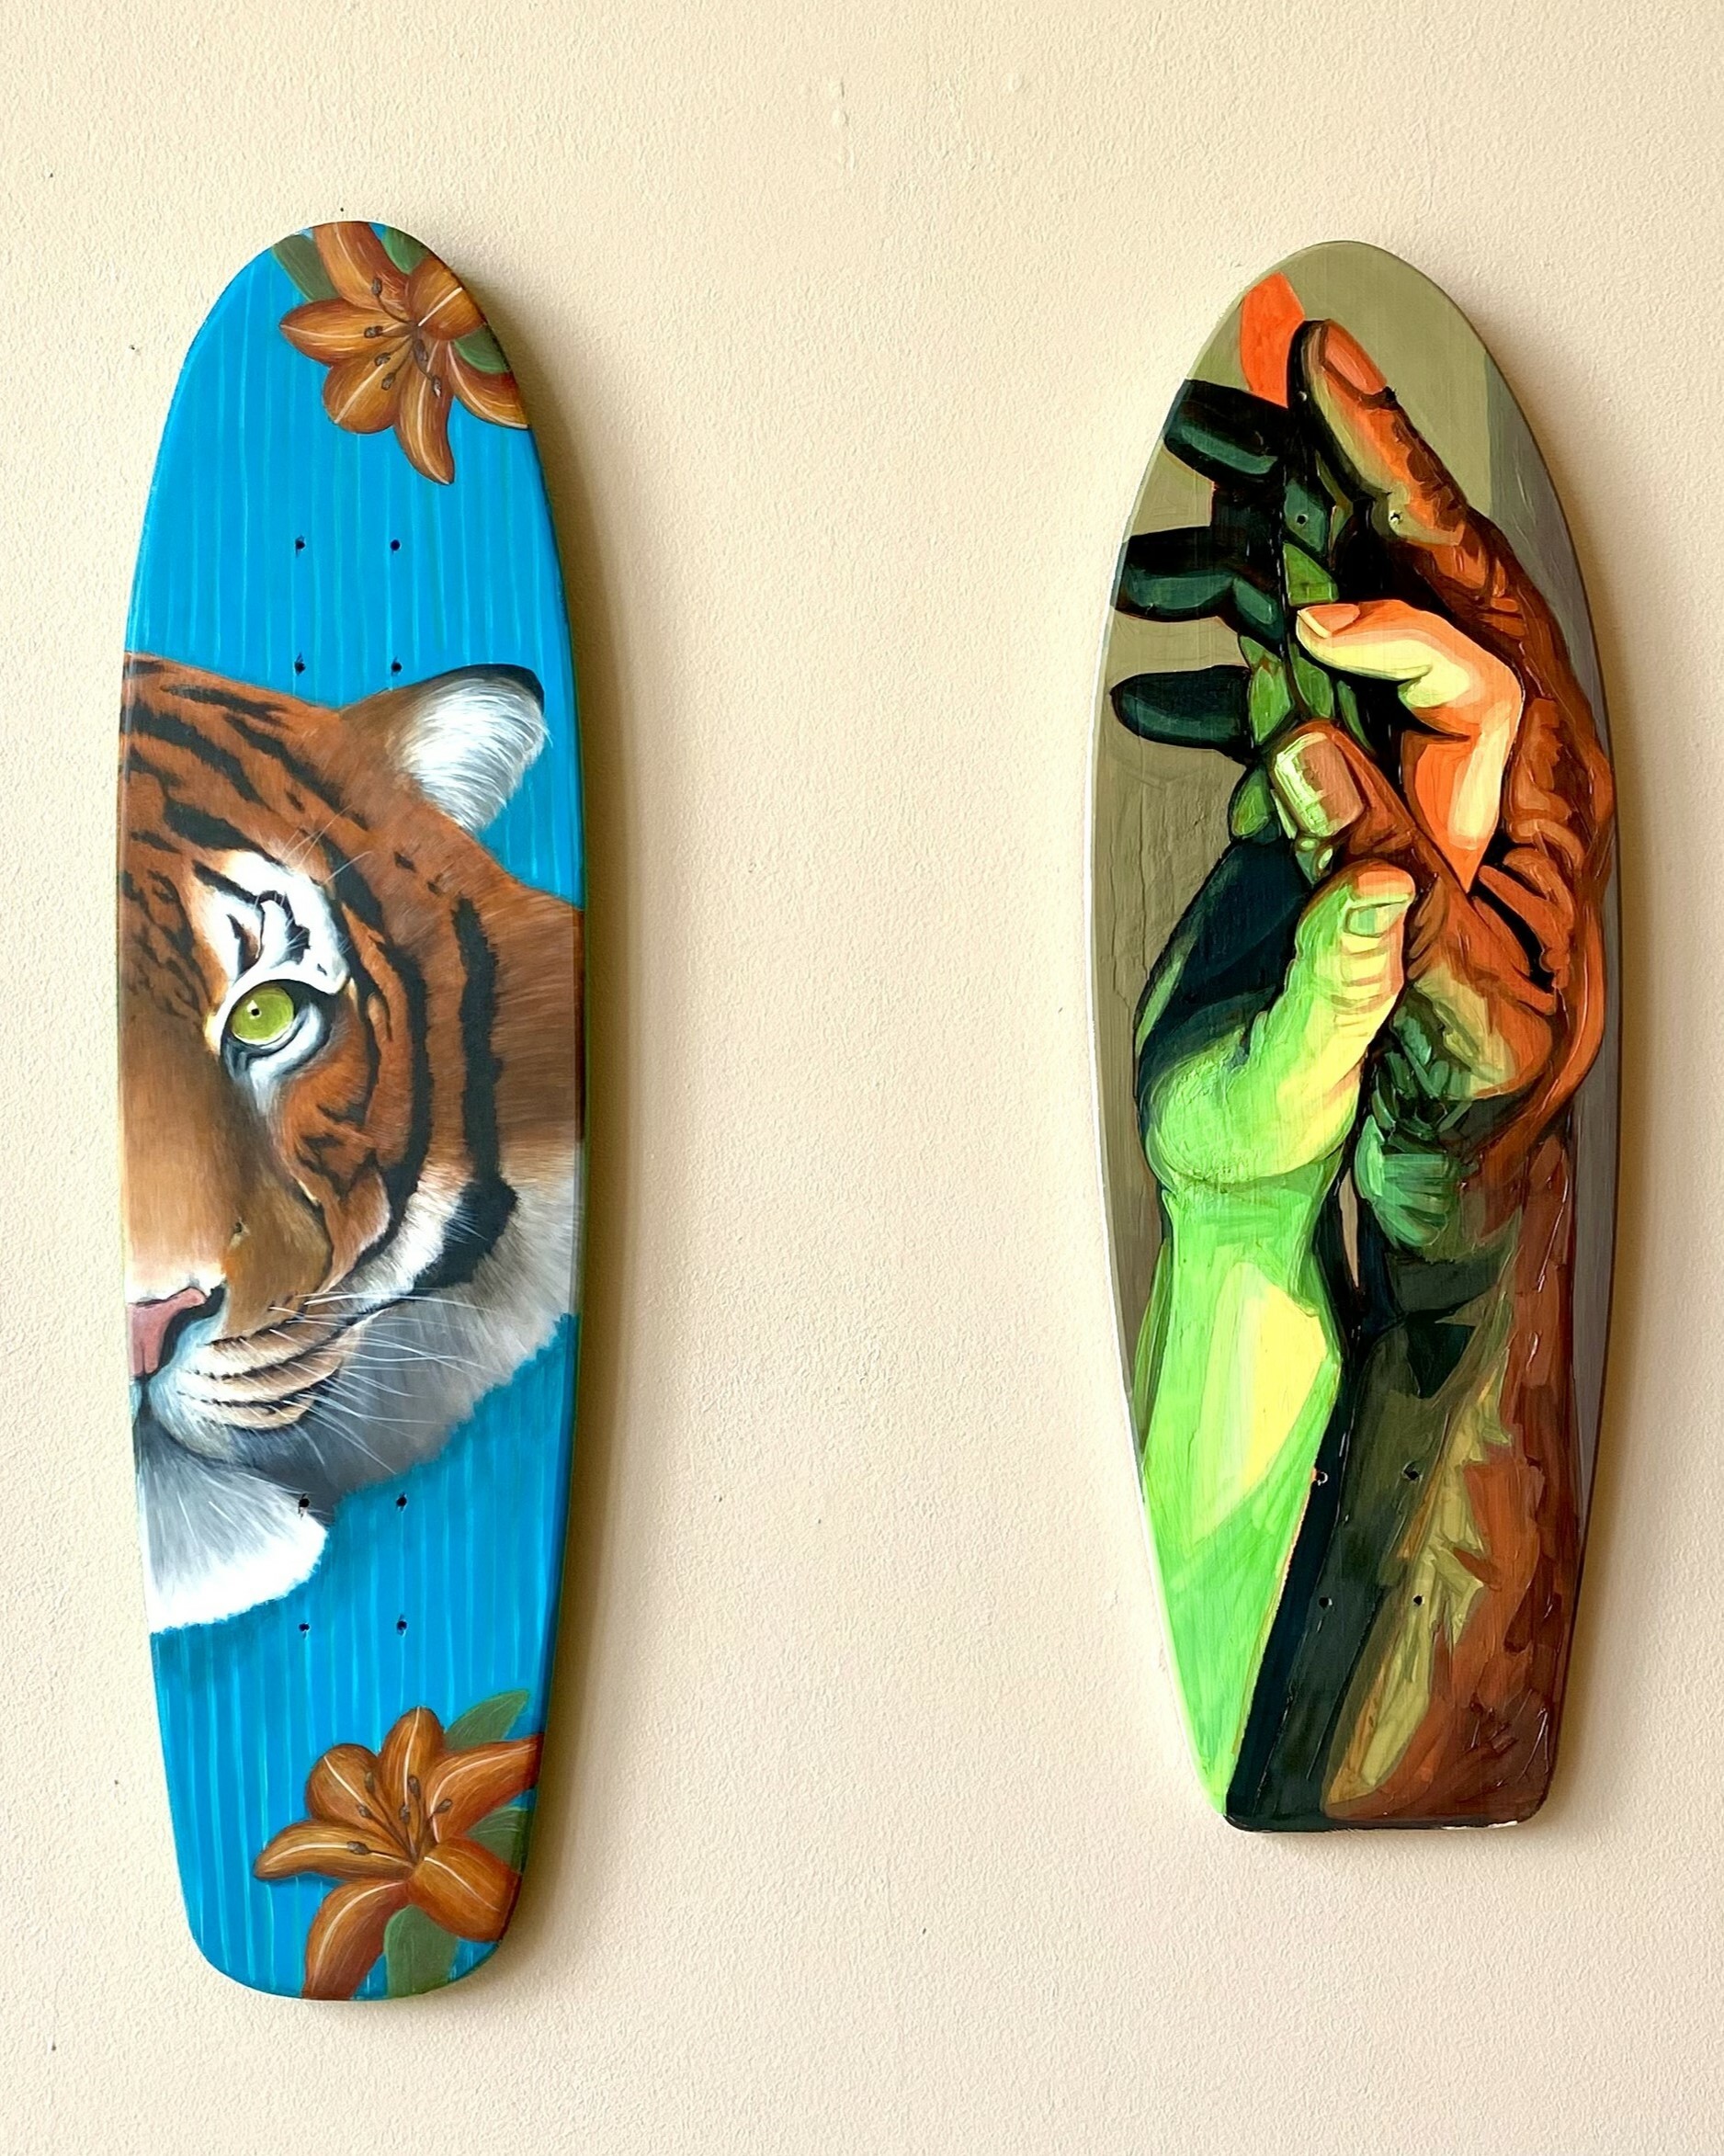 (Left) Molly-Anne Alape, "Tiger," 2023, Acrylic paint on wood; (Right) Angela Godoy, "Hands," 2023, Oil paint on wood